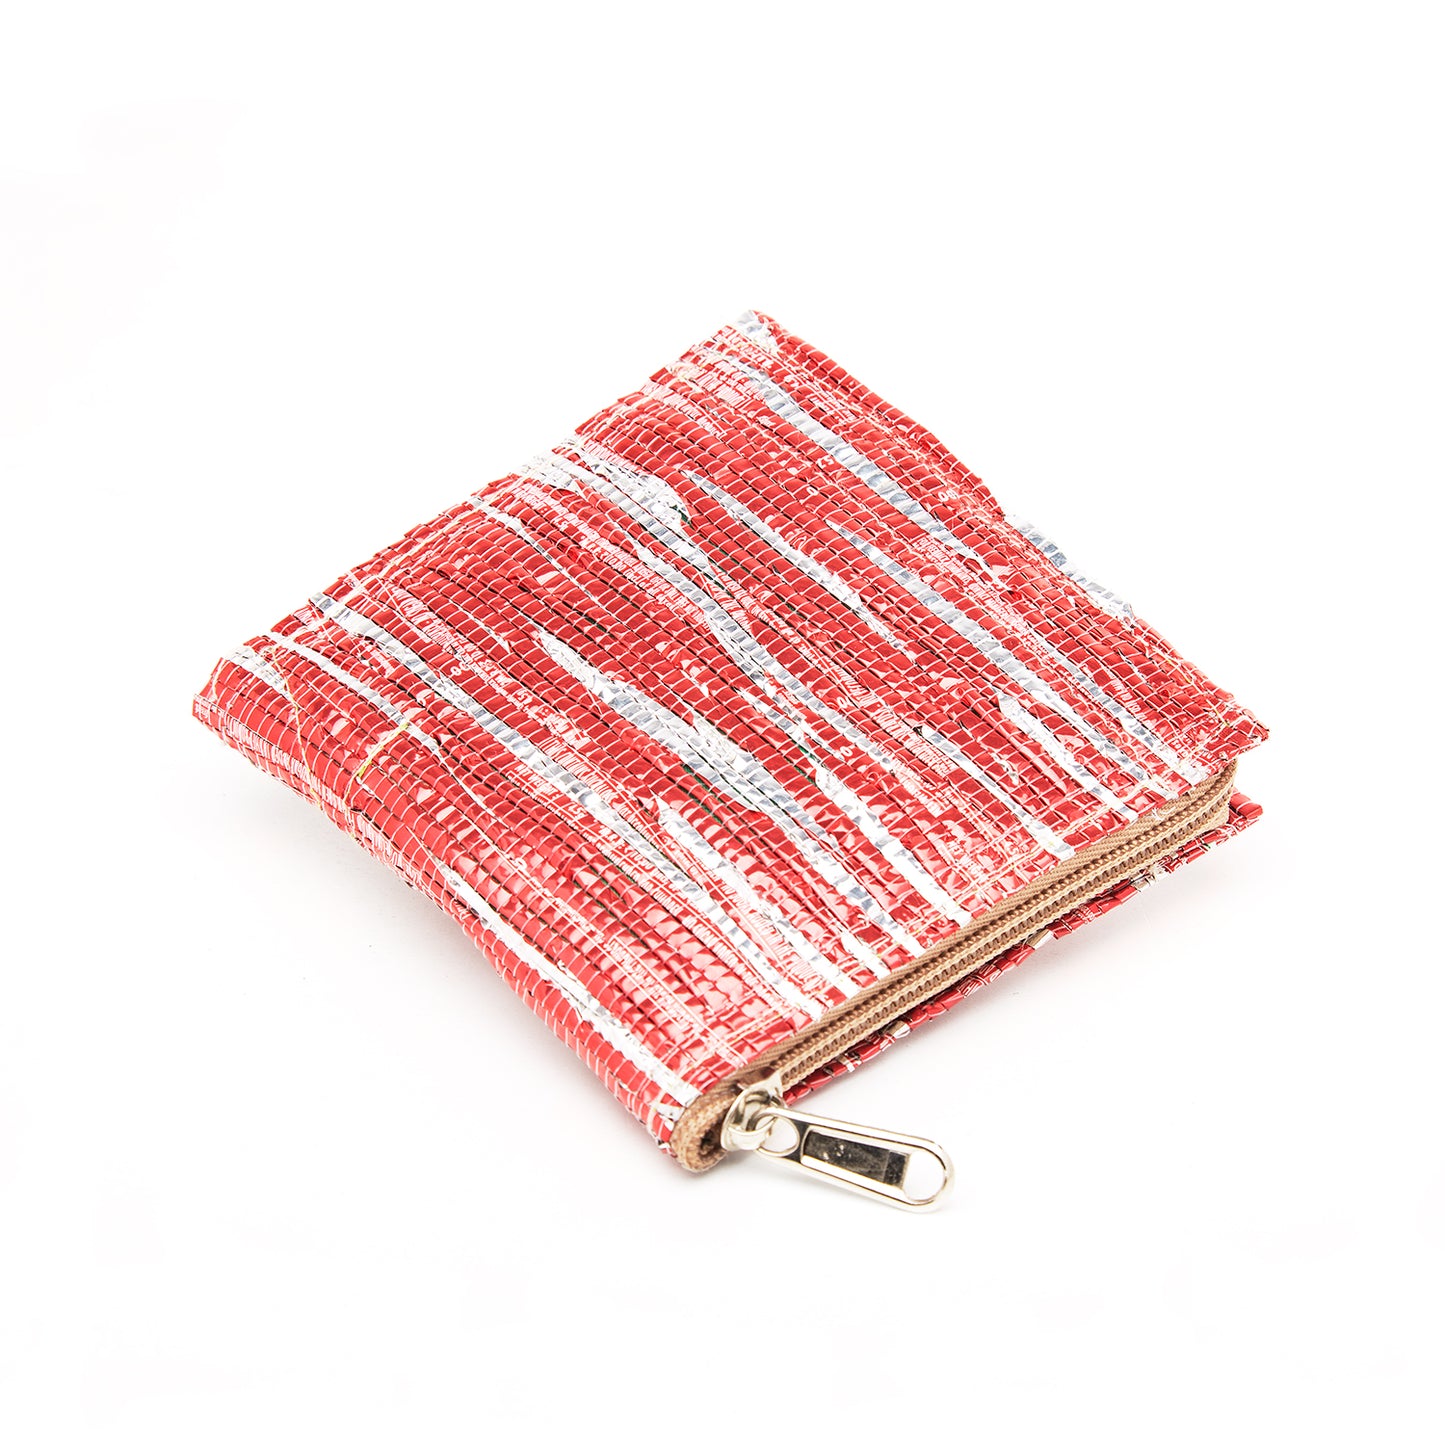 Red & White Folding Bags - Made from Waste Plastic